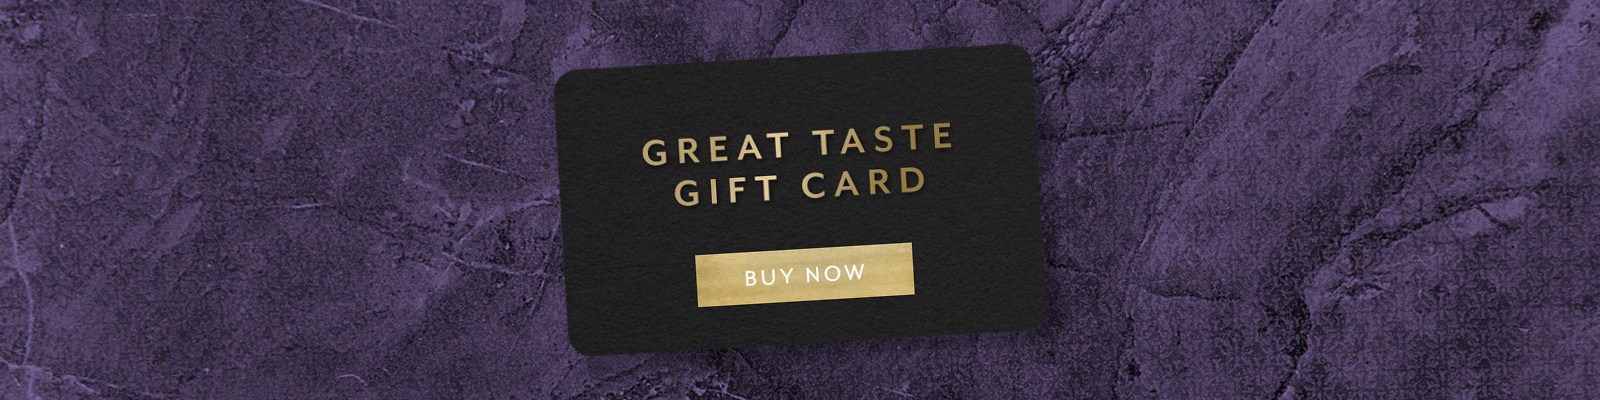 The George & Dragon Gift Card